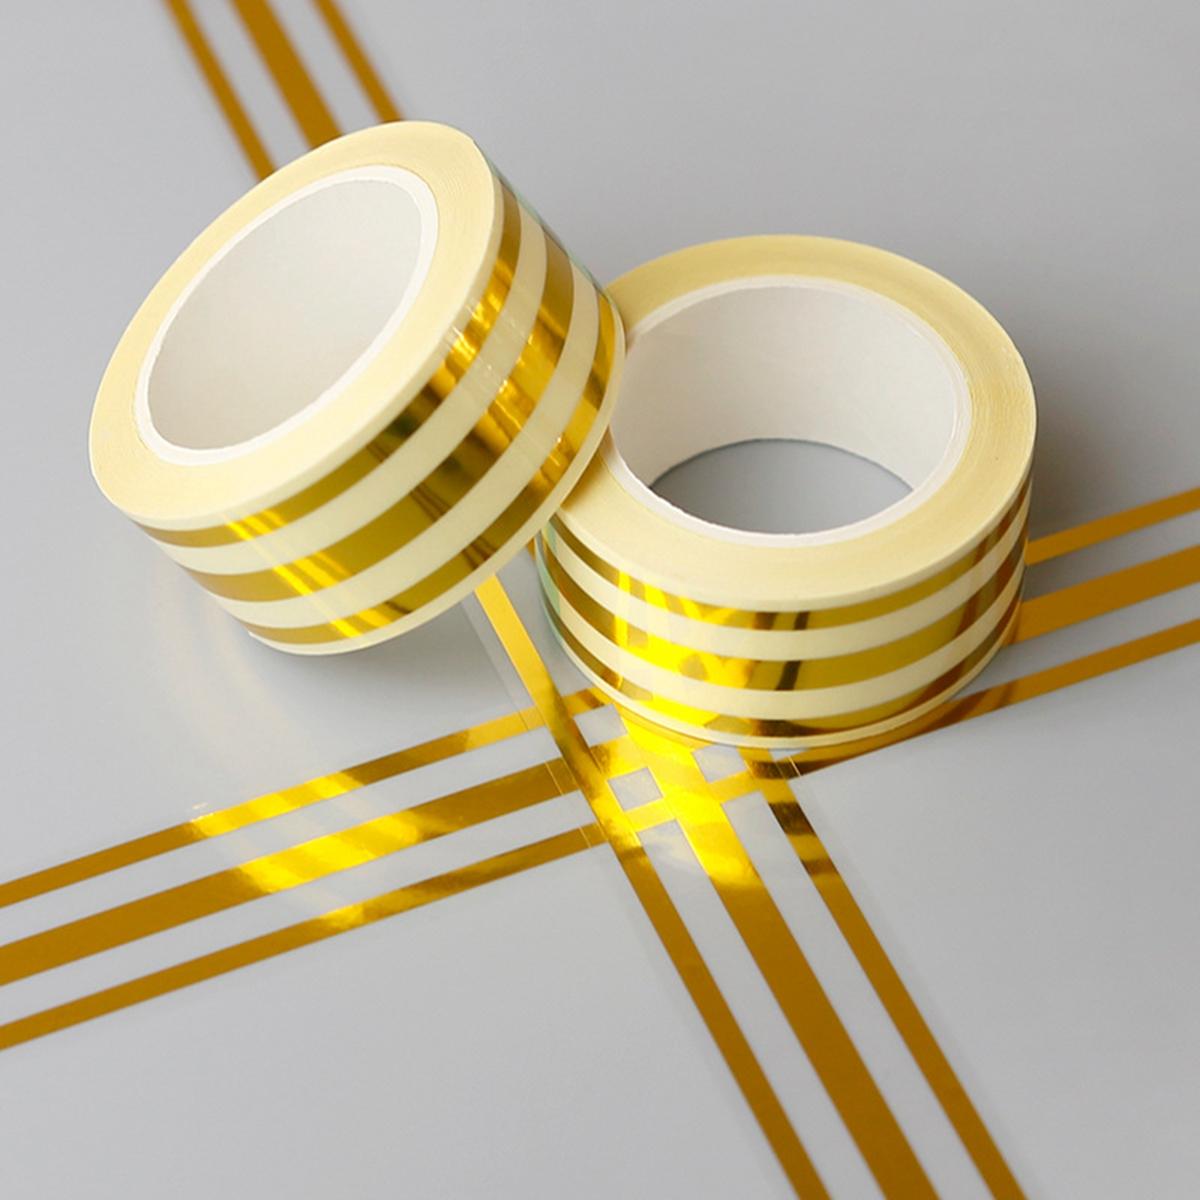 

1 Roll Decorative Gold Accent Seam Tape (5m), Waterproof, Wear-resistant, Tile Decorations, Floors & Walls